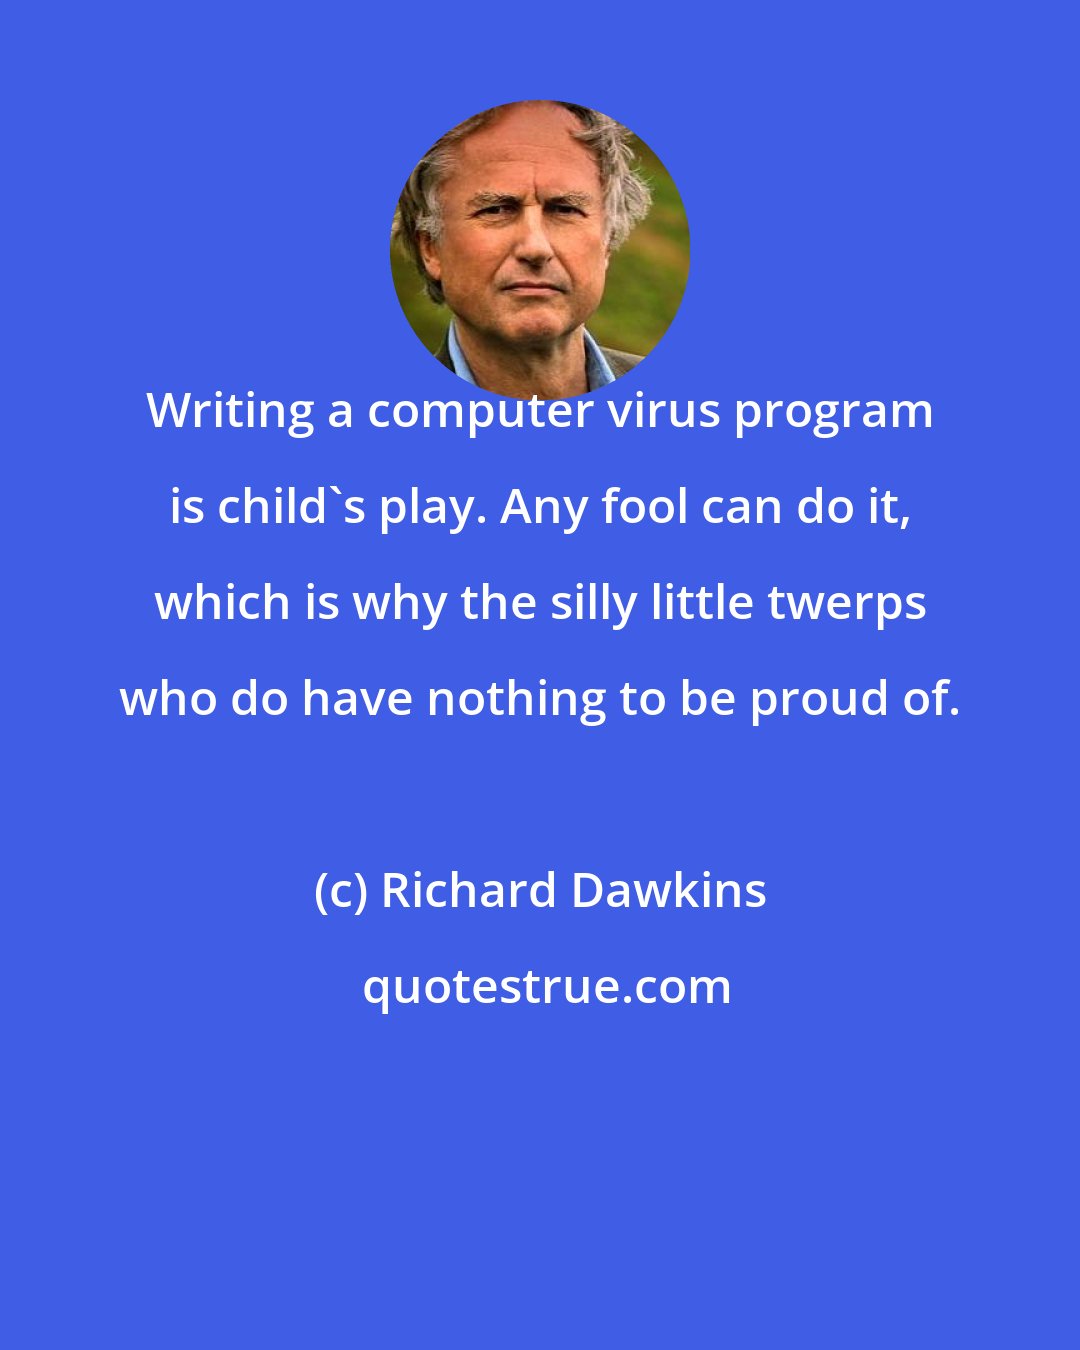 Richard Dawkins: Writing a computer virus program is child's play. Any fool can do it, which is why the silly little twerps who do have nothing to be proud of.